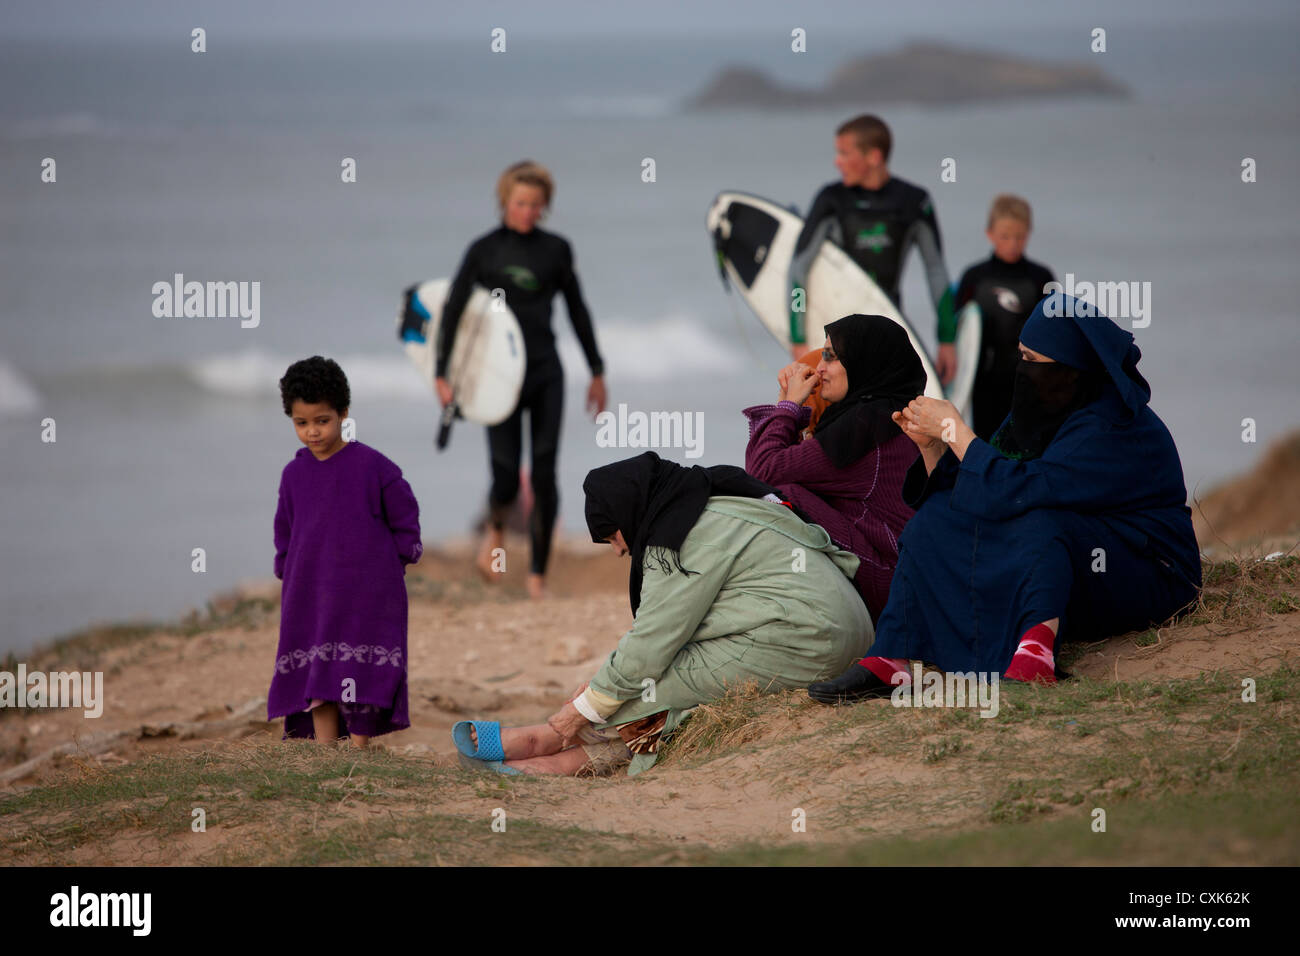 Local Moroccans and child with surfers in background on the beach, Essaouira, Morocco. Stock Photo